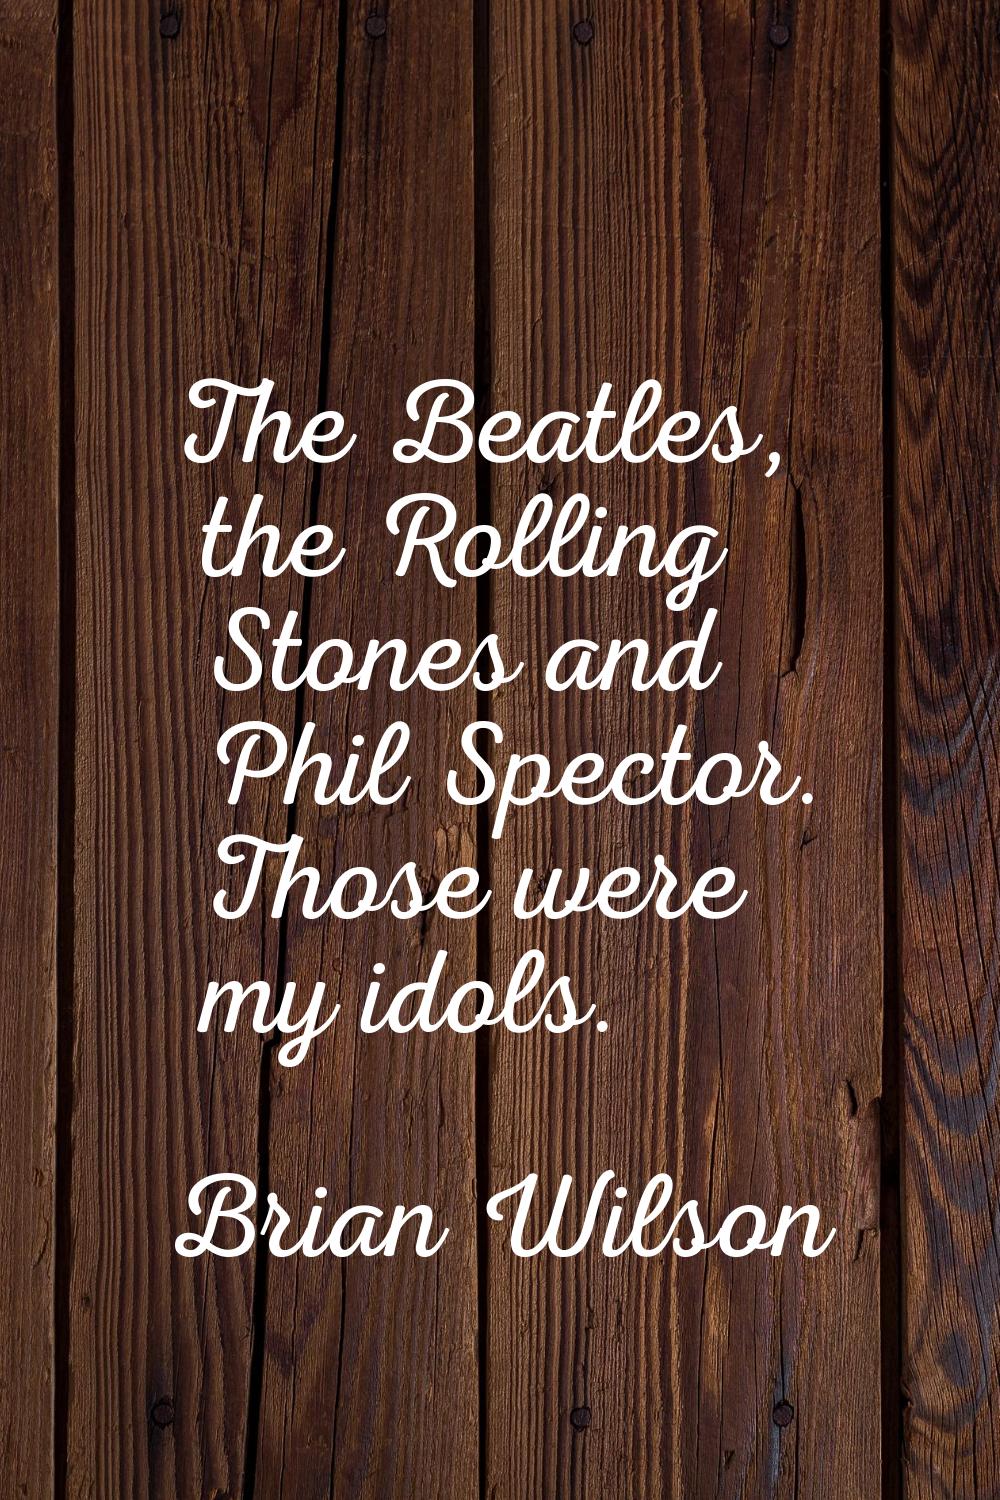 The Beatles, the Rolling Stones and Phil Spector. Those were my idols.